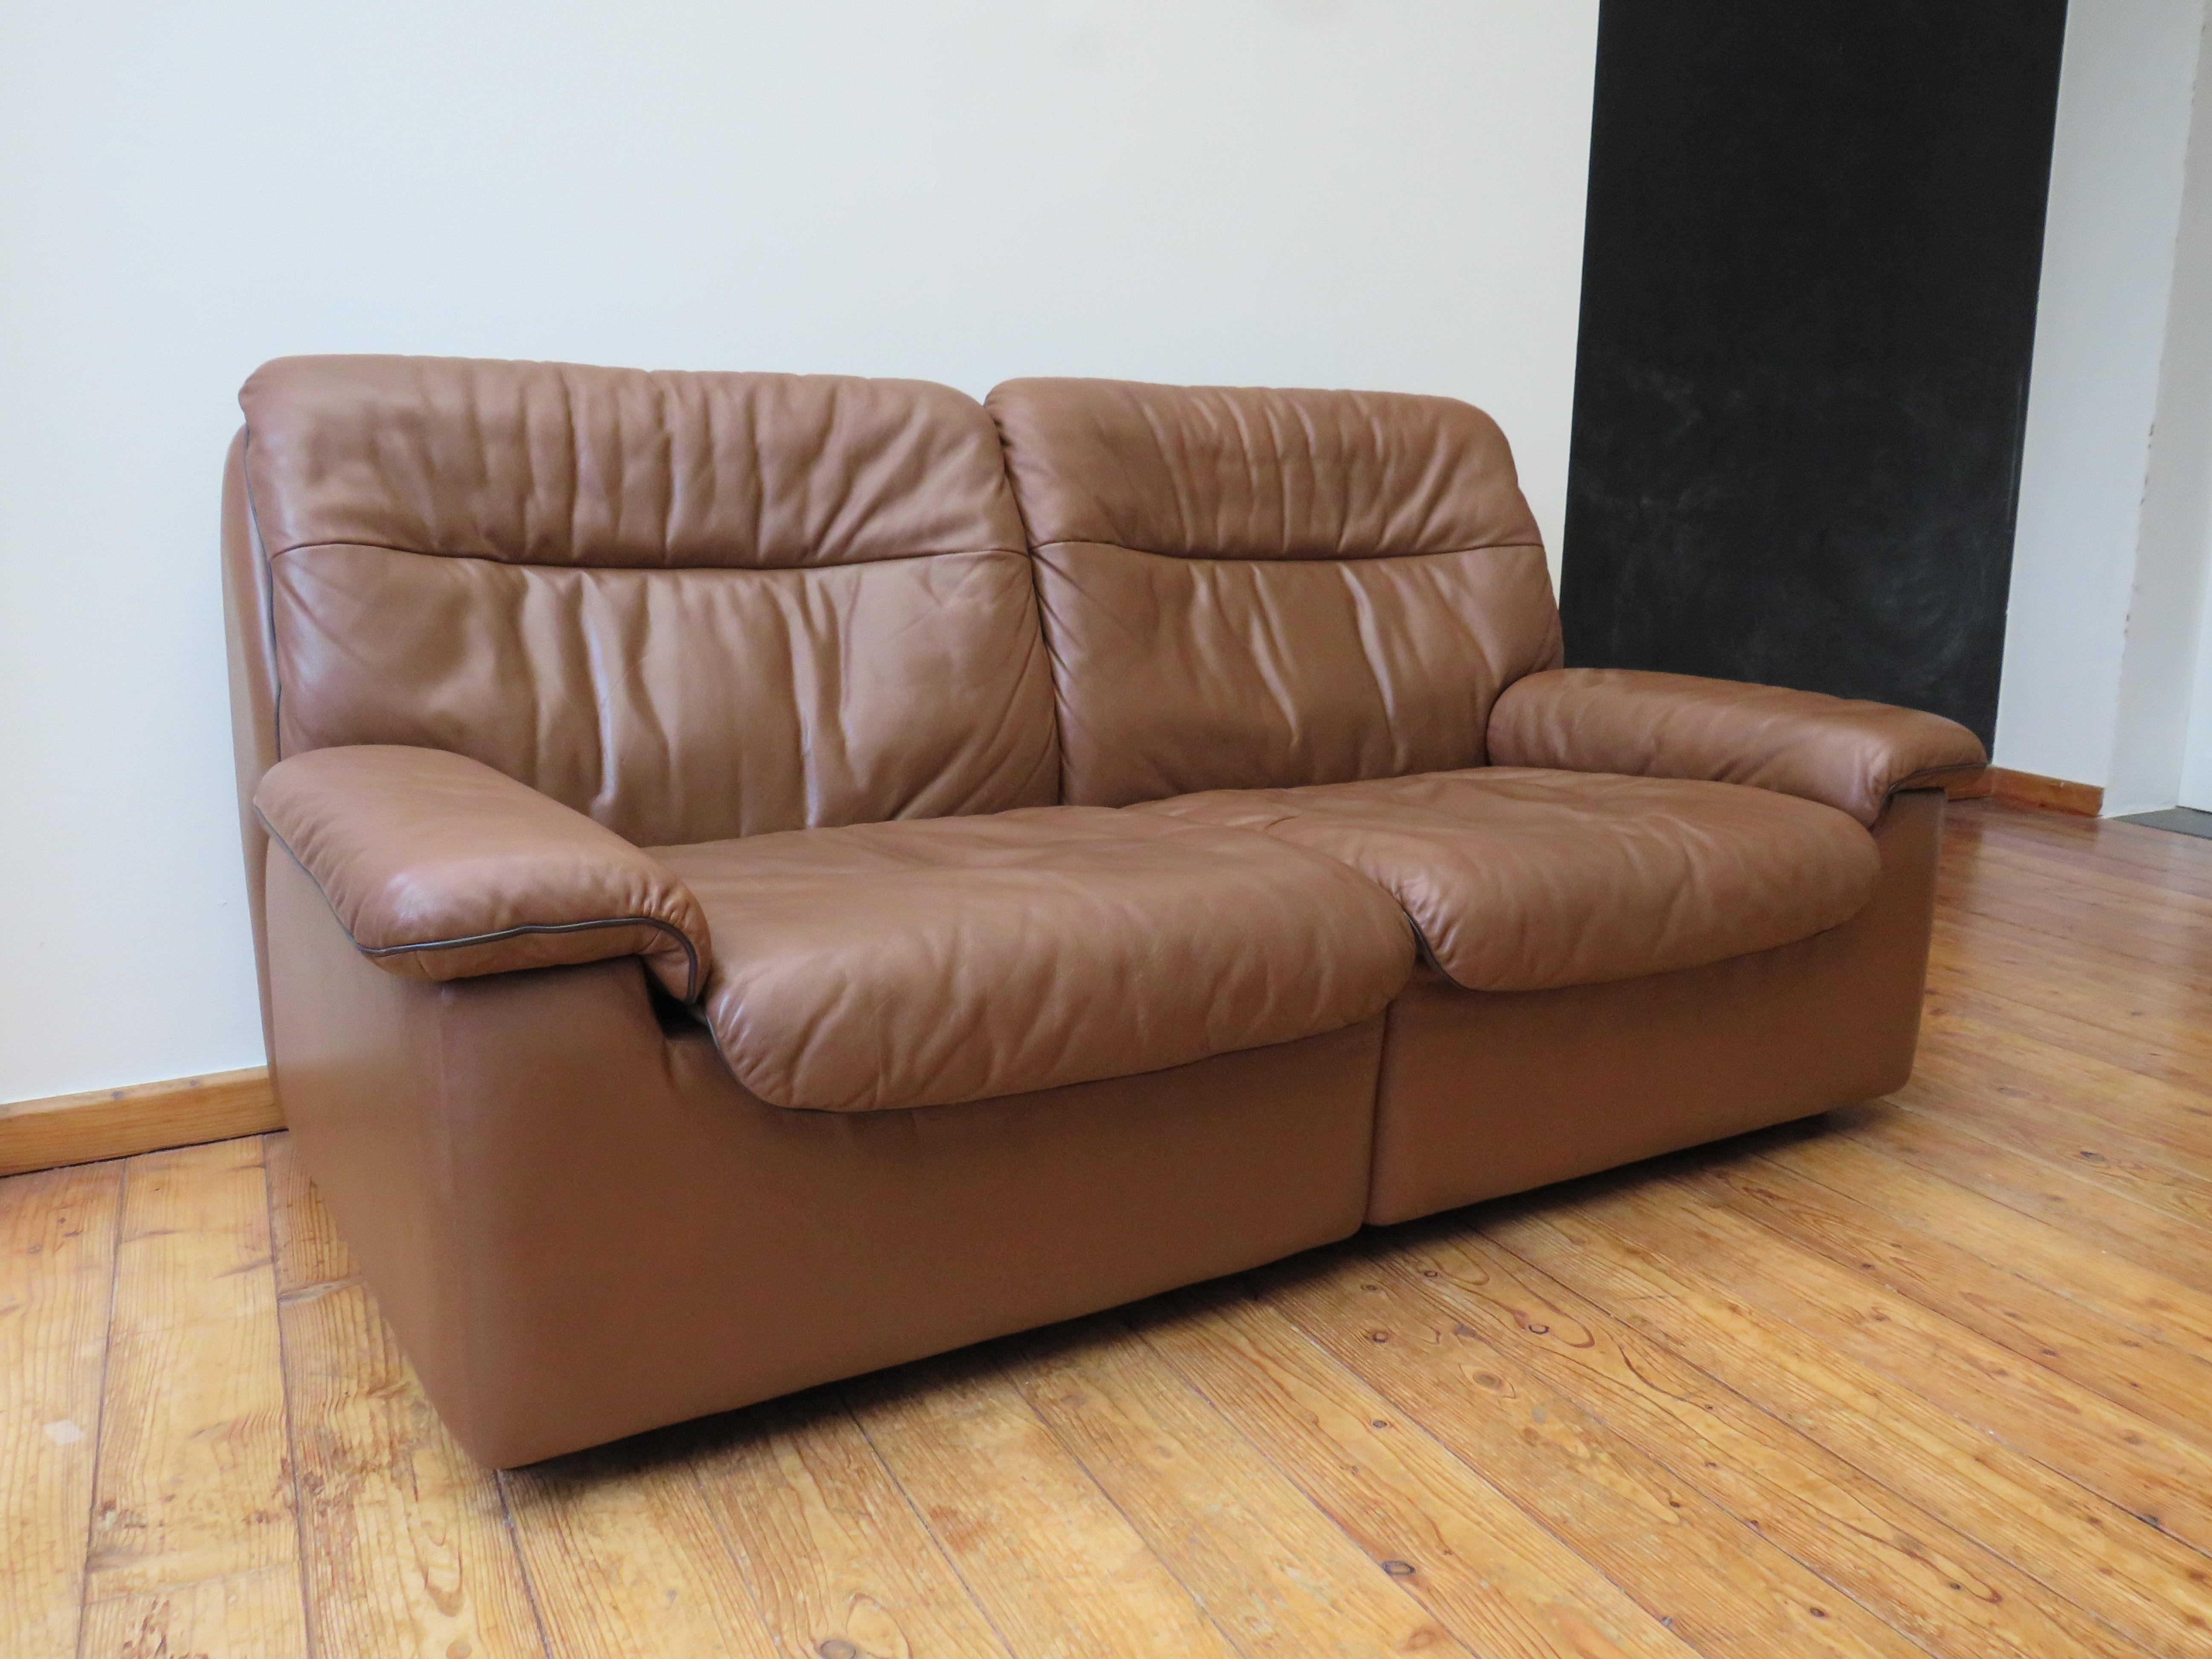 De Sede sofa, Model DS 66 manufactured by De Sede, Switzerland in 1970s.
The sofa is made of caramel-colored high quality leather and finished with brown piping. The both sofas are in a remarkable good condition.